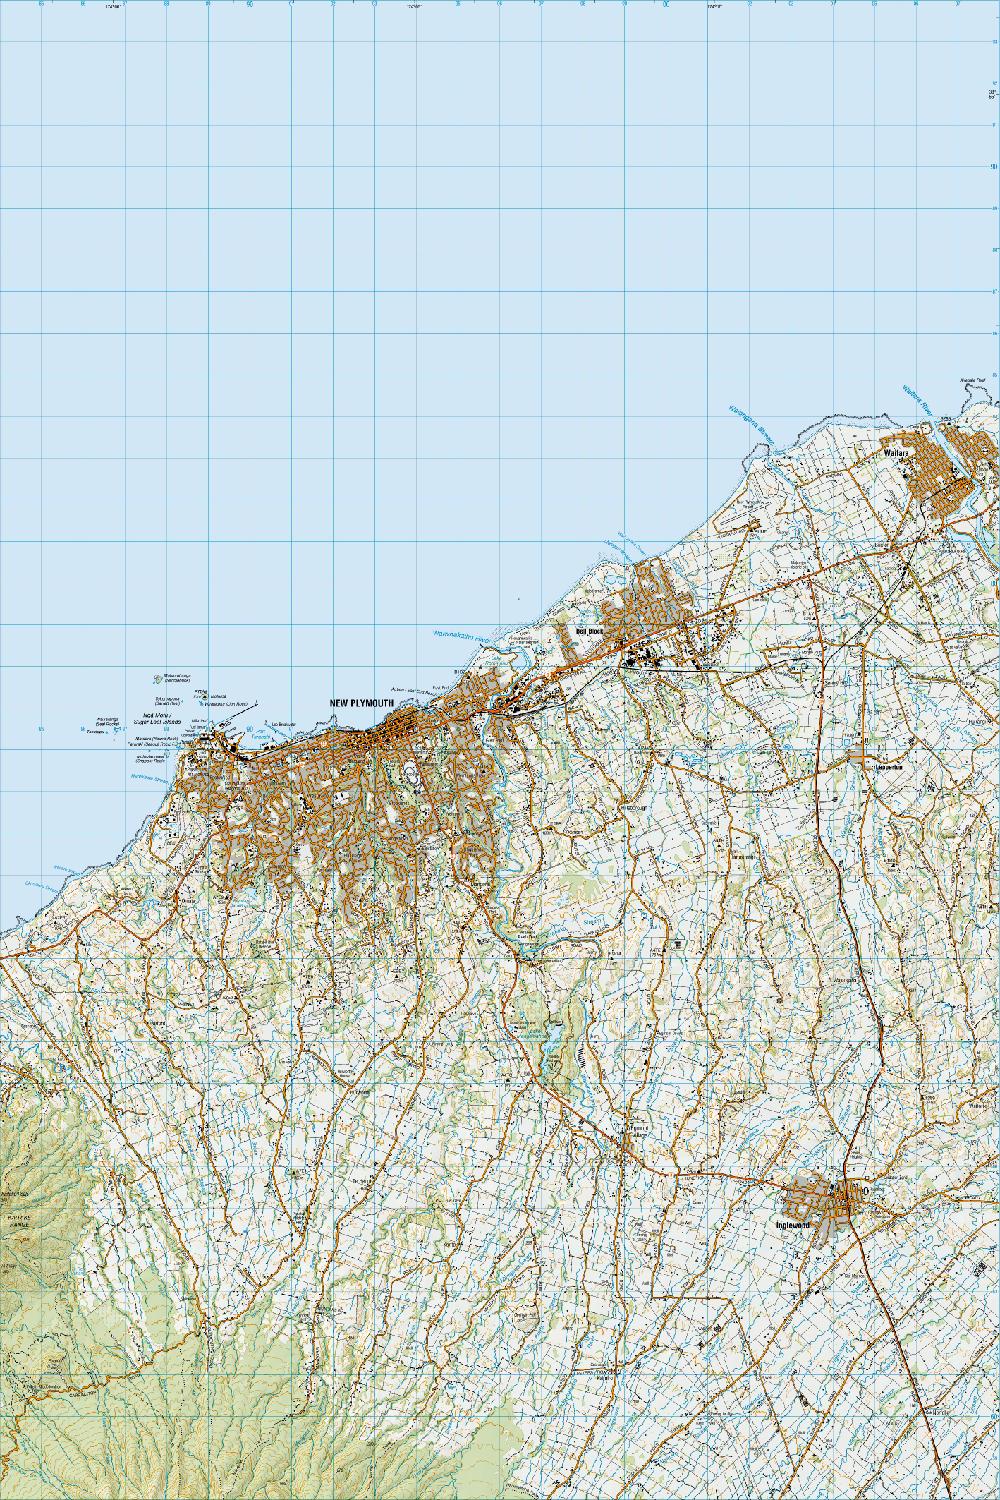 Topo map of New Plymouth